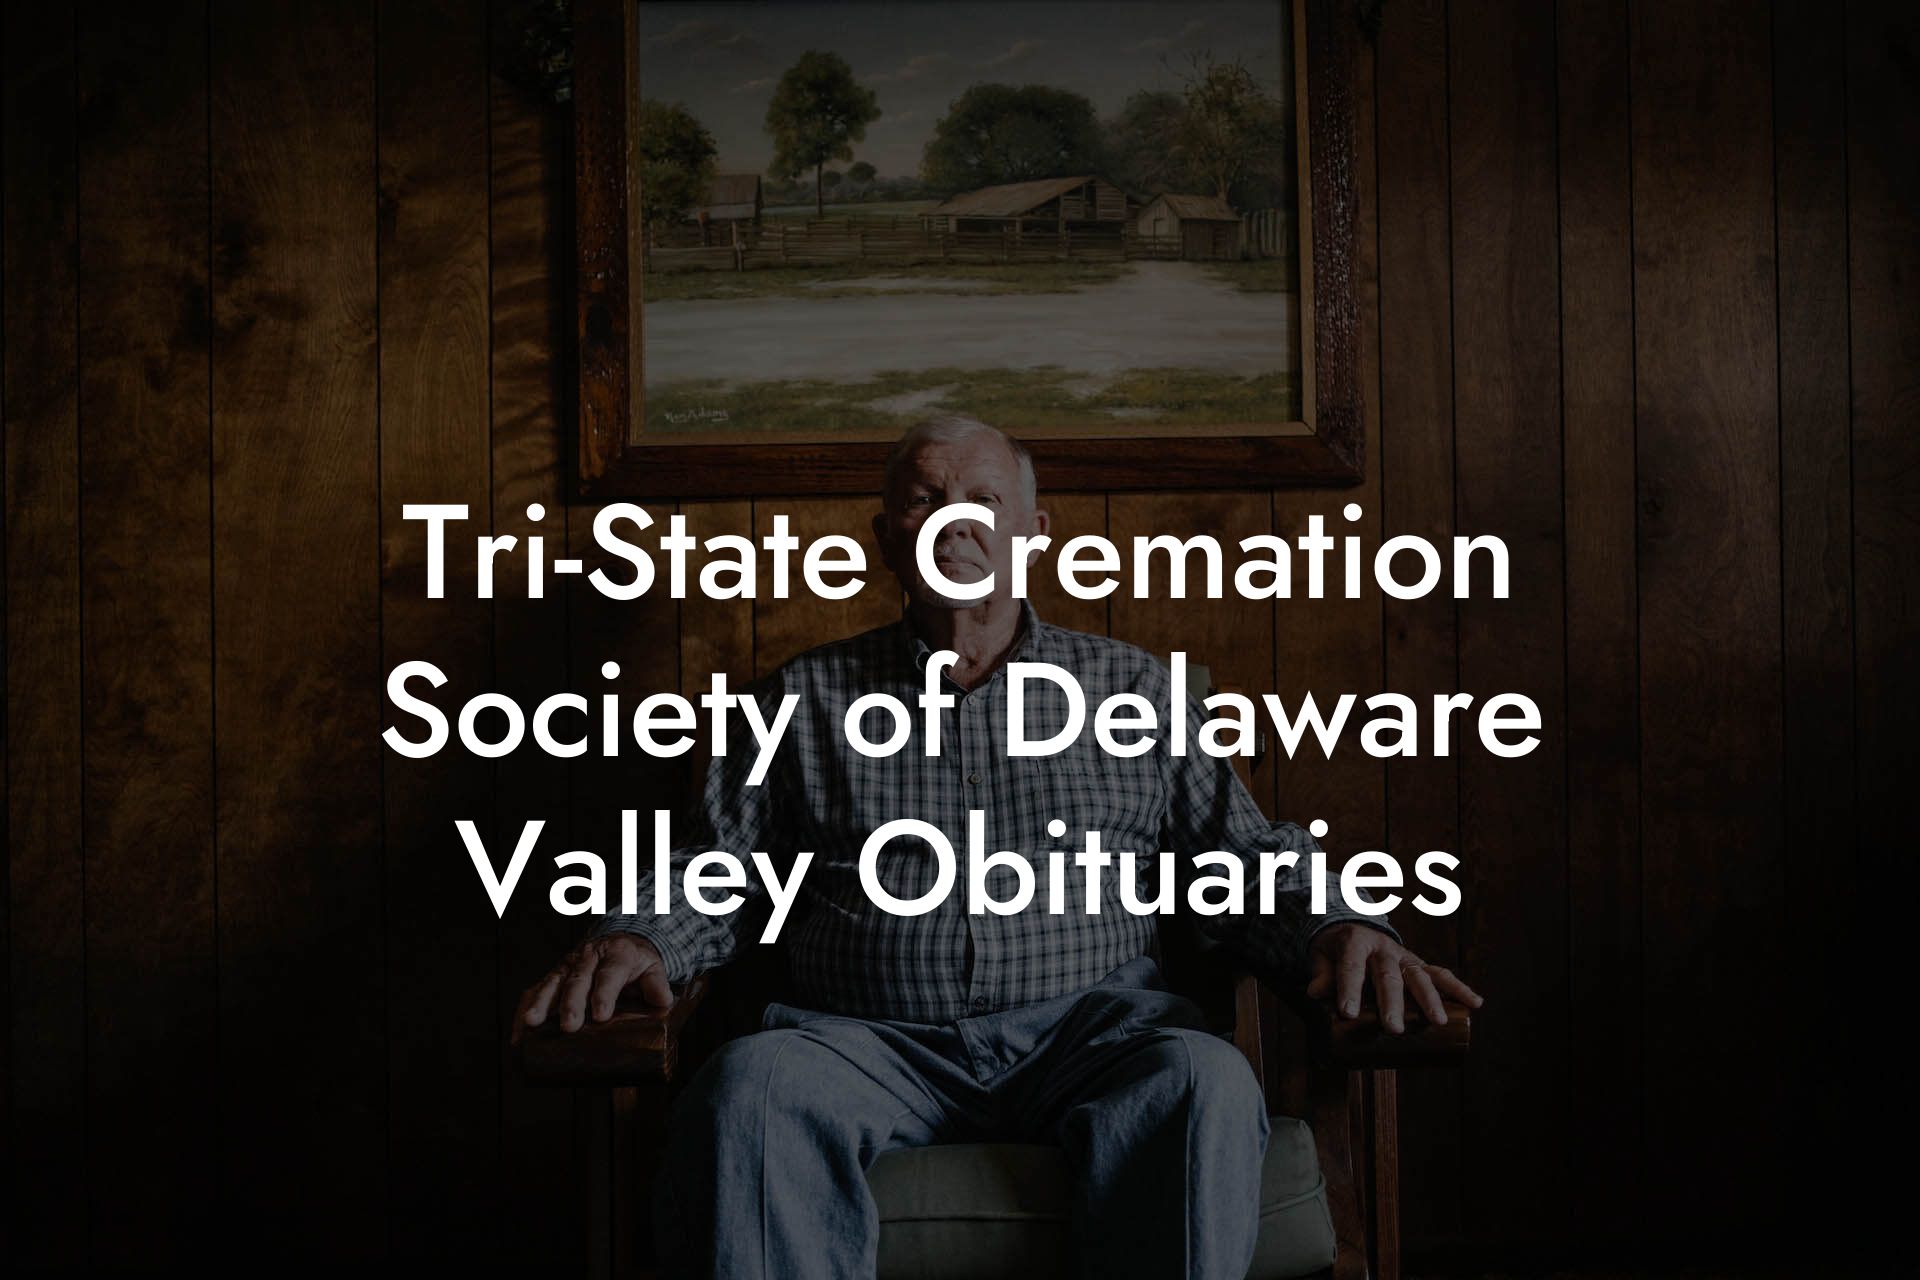 Tri-State Cremation Society of Delaware Valley Obituaries